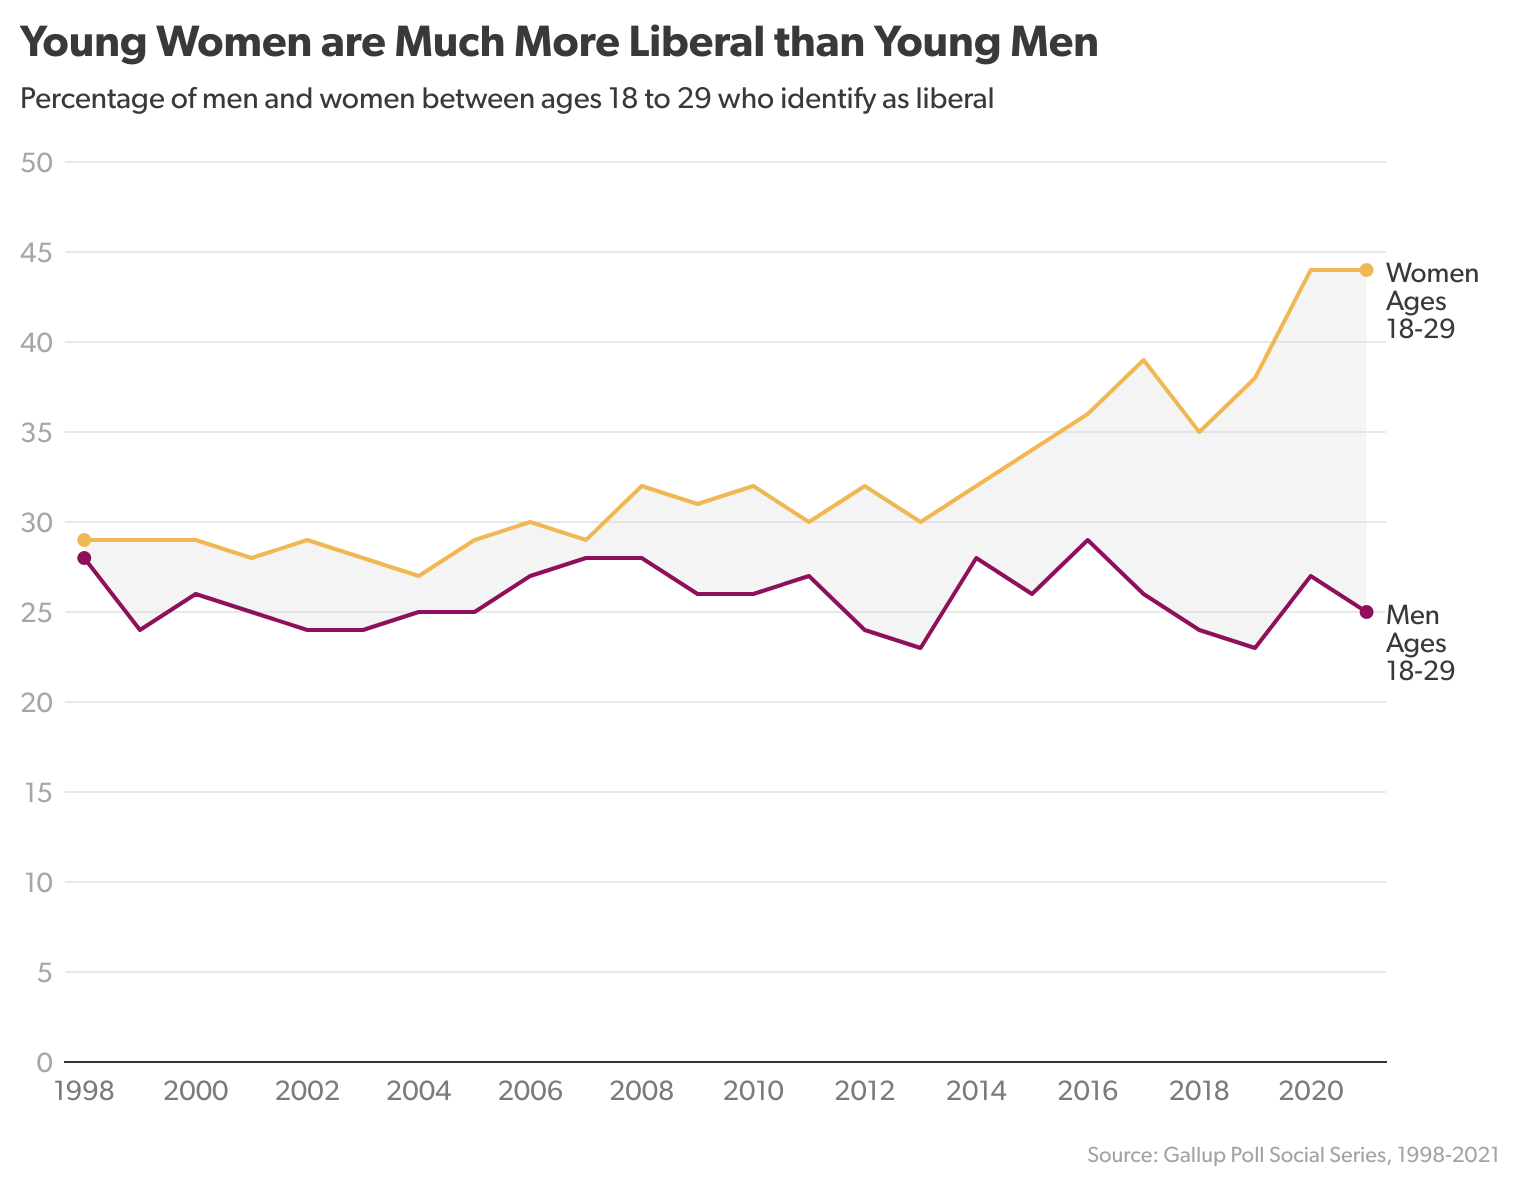 Chart showing percentage of men and women between ages 18 to 29 who identify as liberal